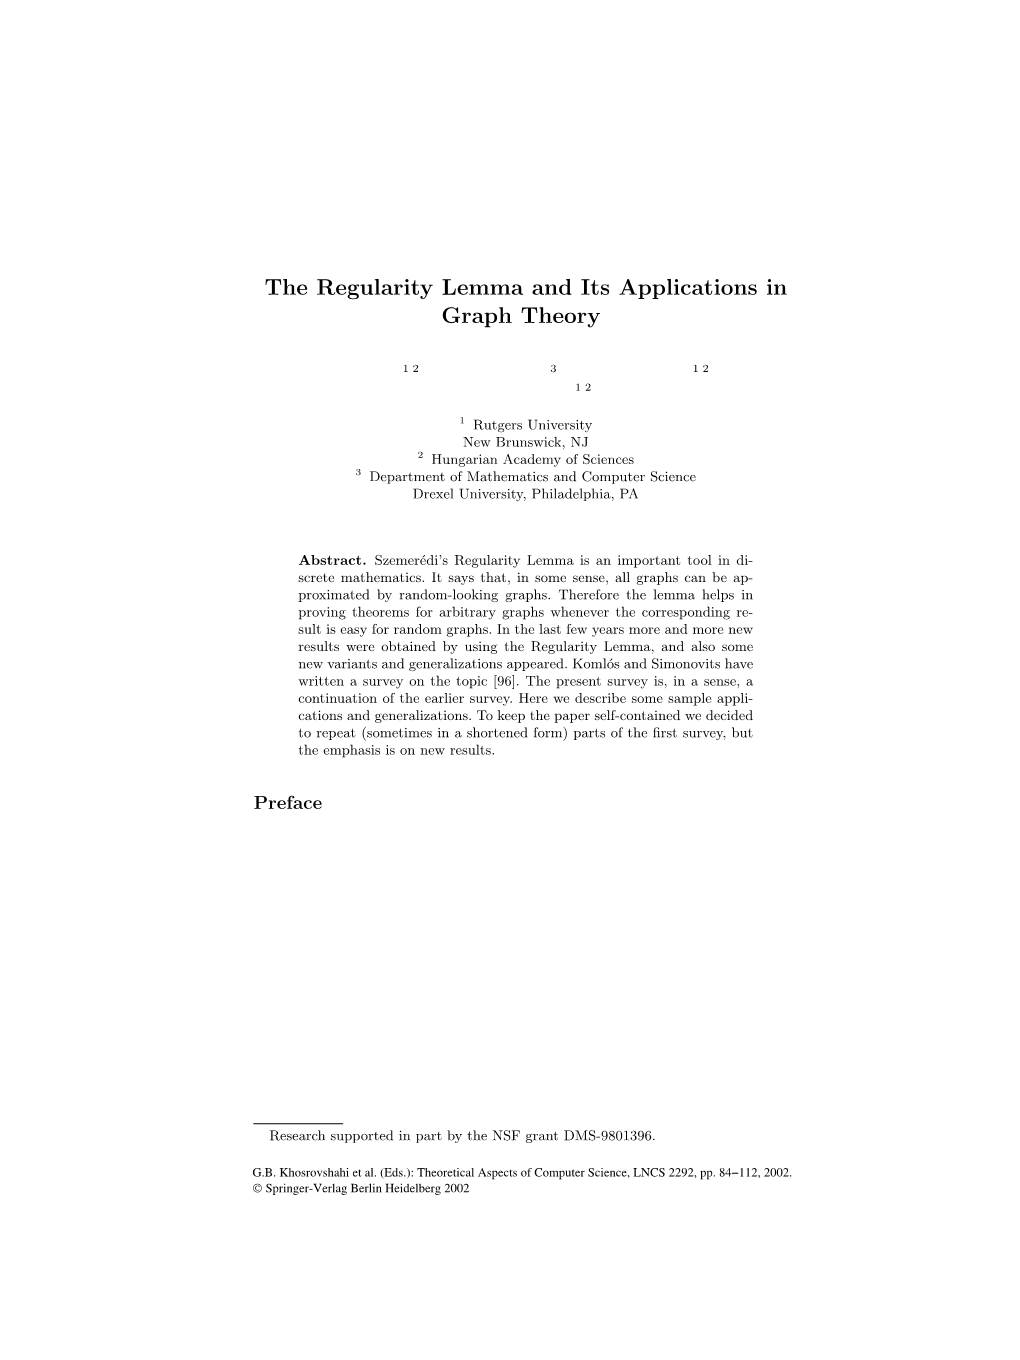 The Regularity Lemma and Its Applications in Graph Theory